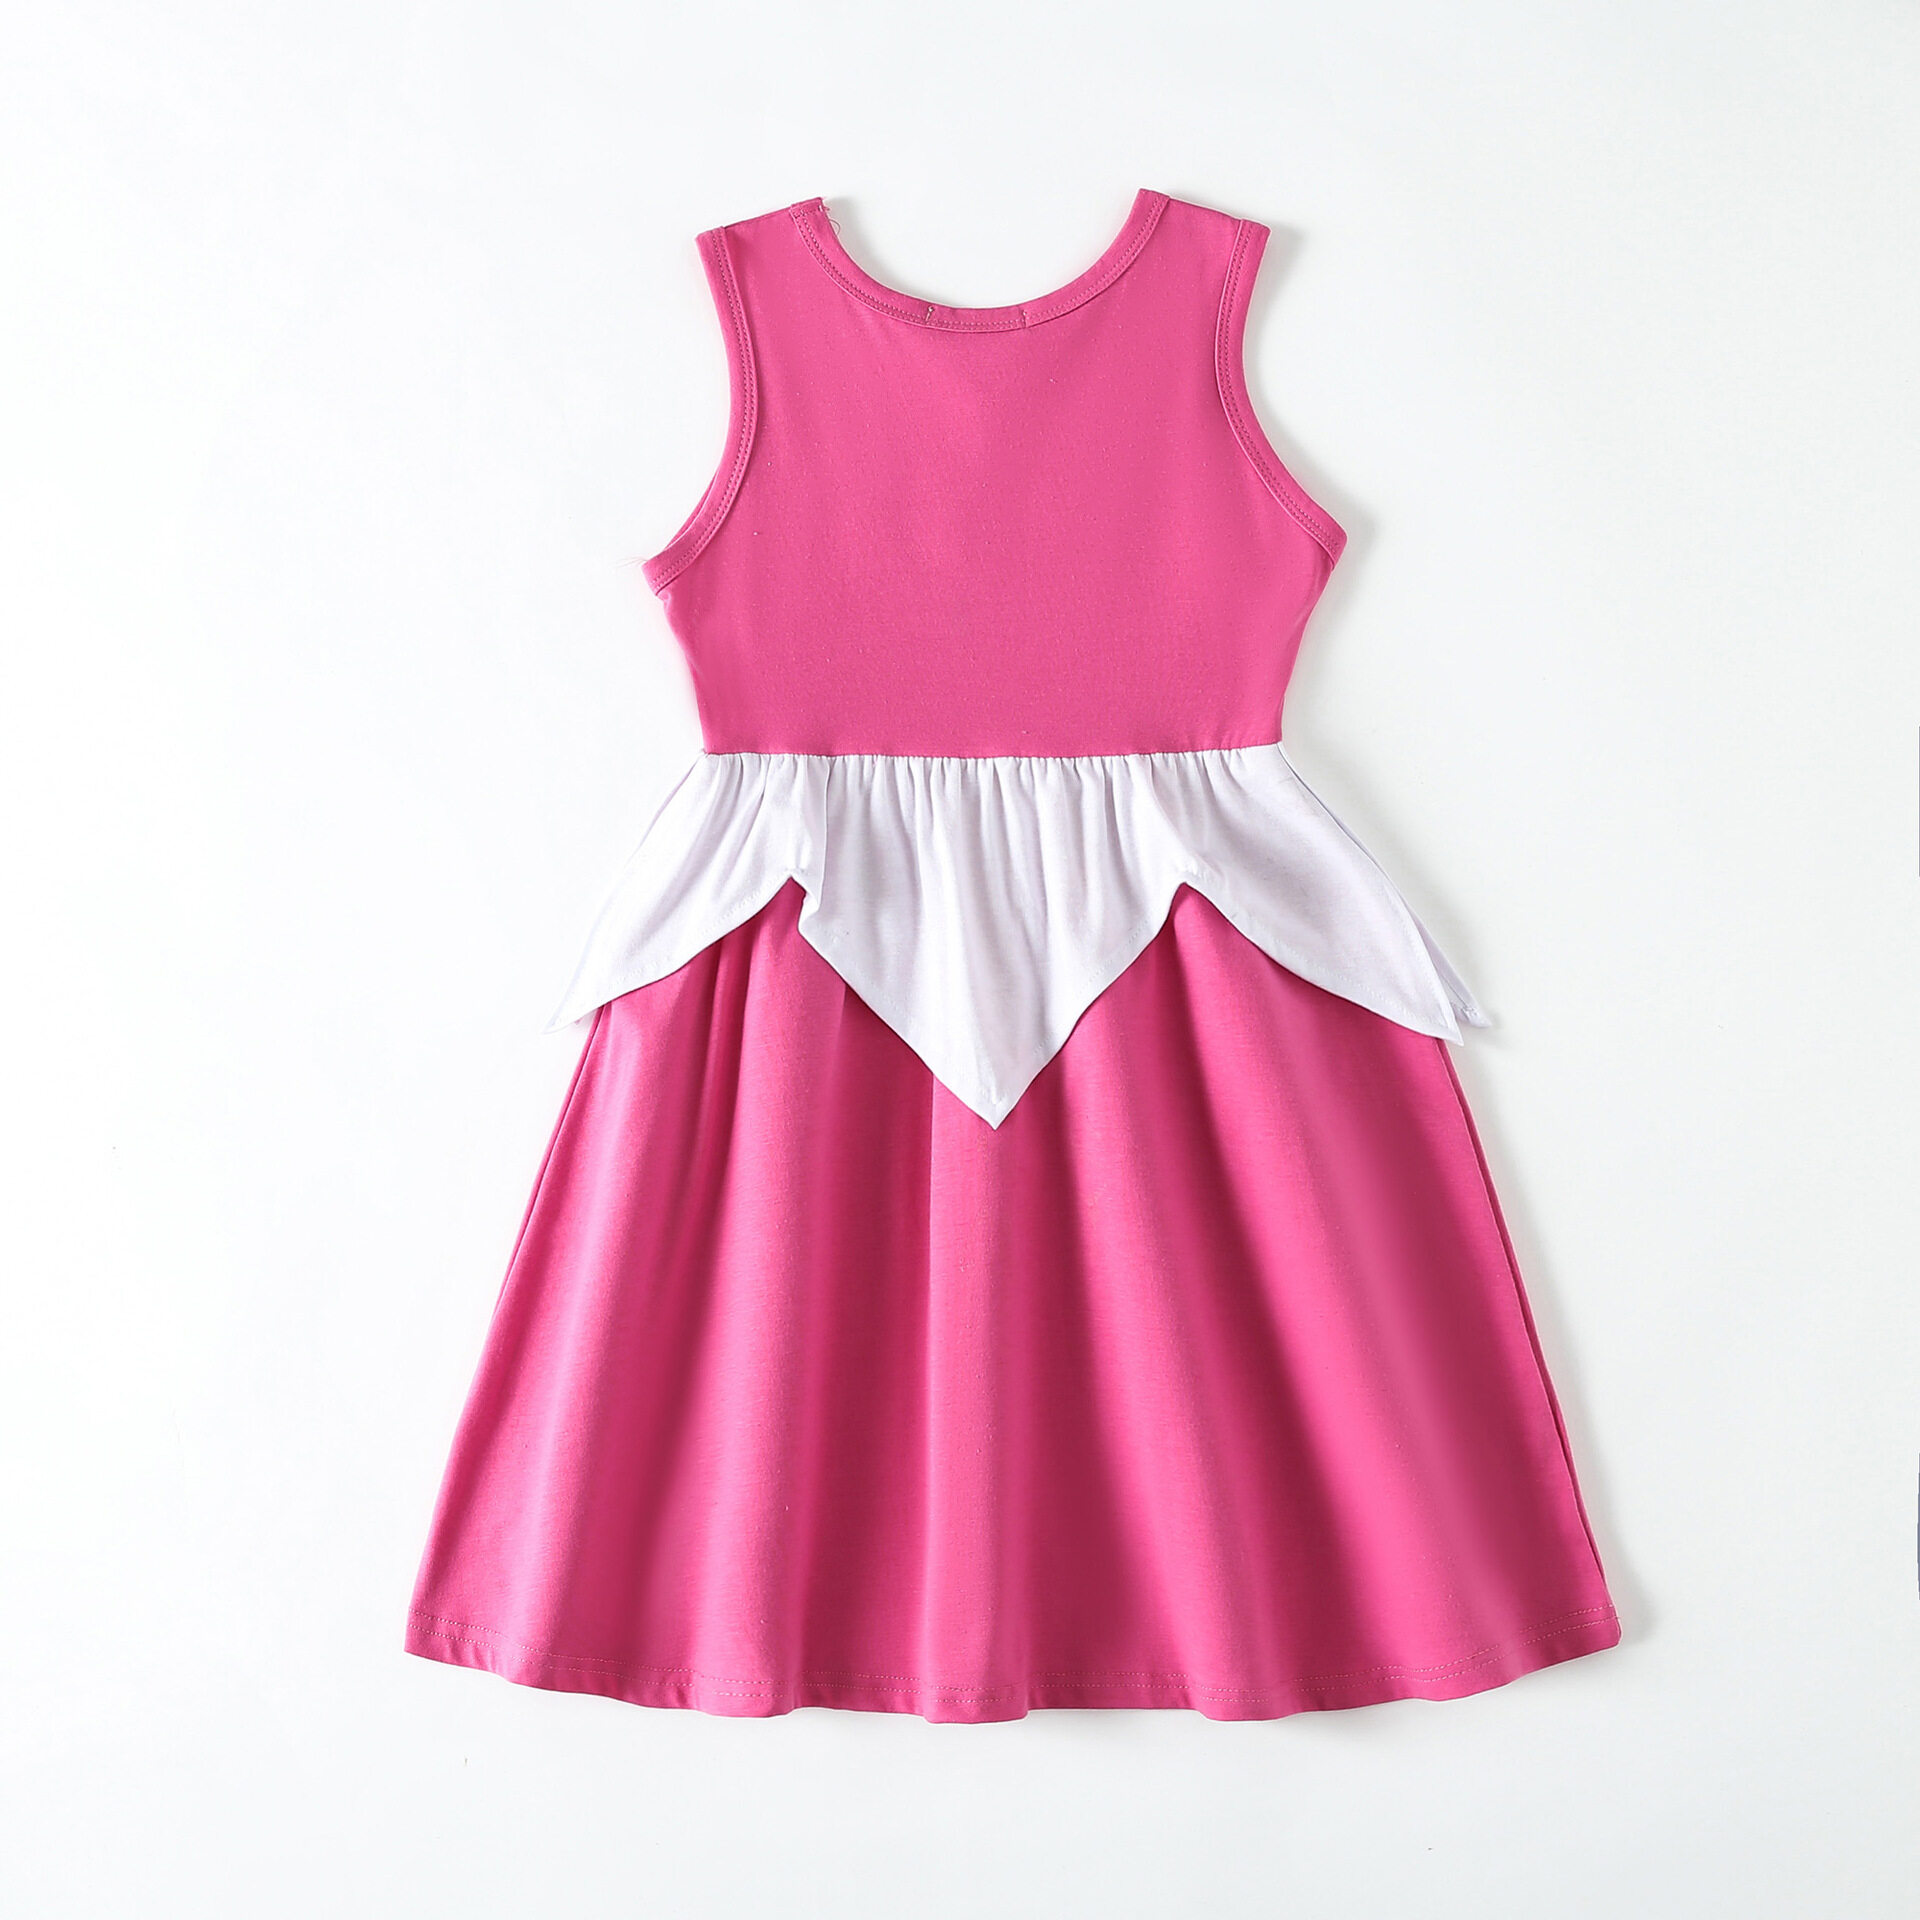 Cotton Baby Girl Clothes Summer Little Princess Toddler Kids Party Tutu Dresses - image 2 of 2